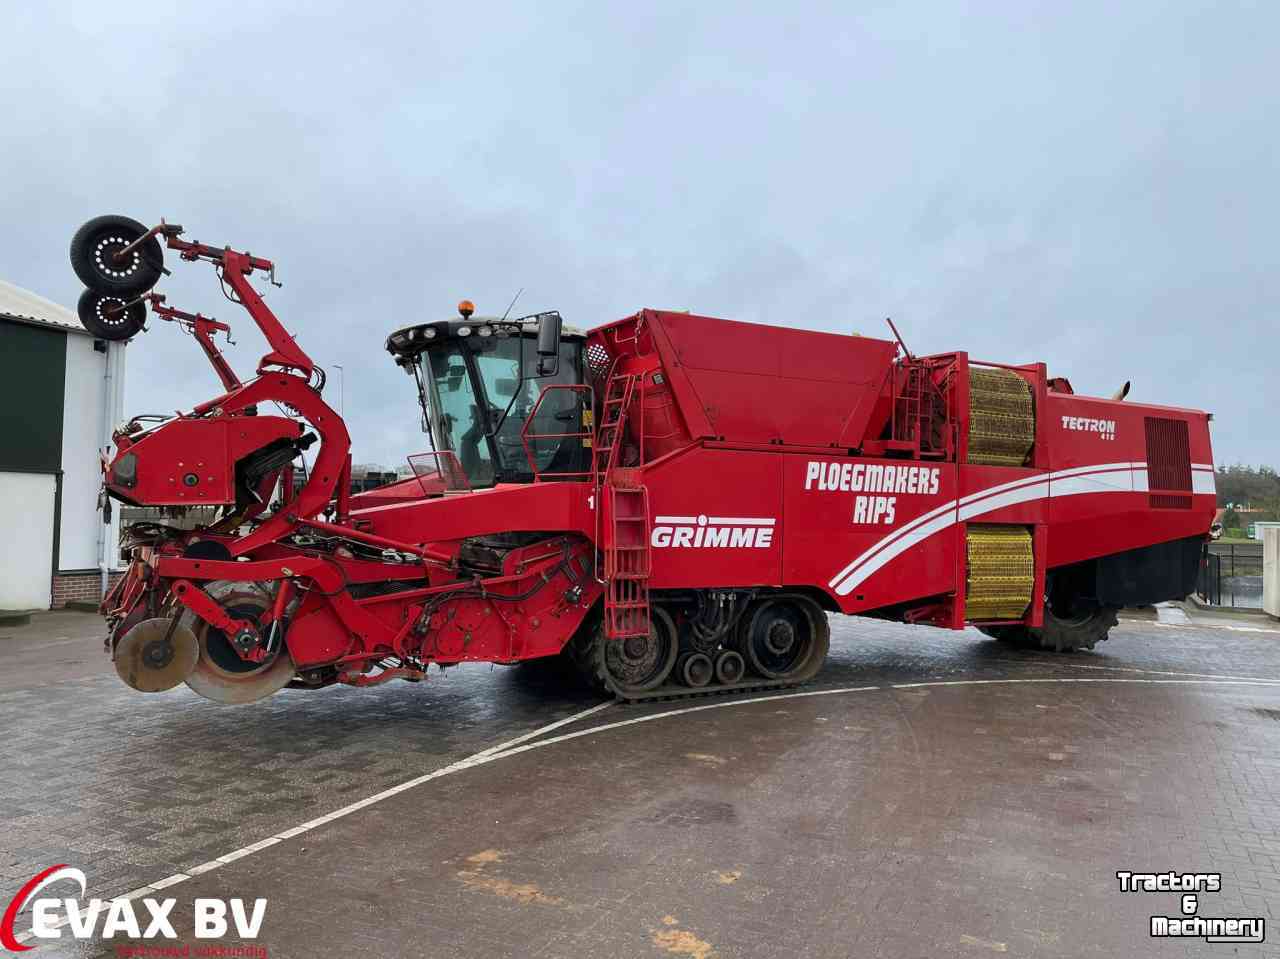 Aardappelrooier Grimme Tectron 410